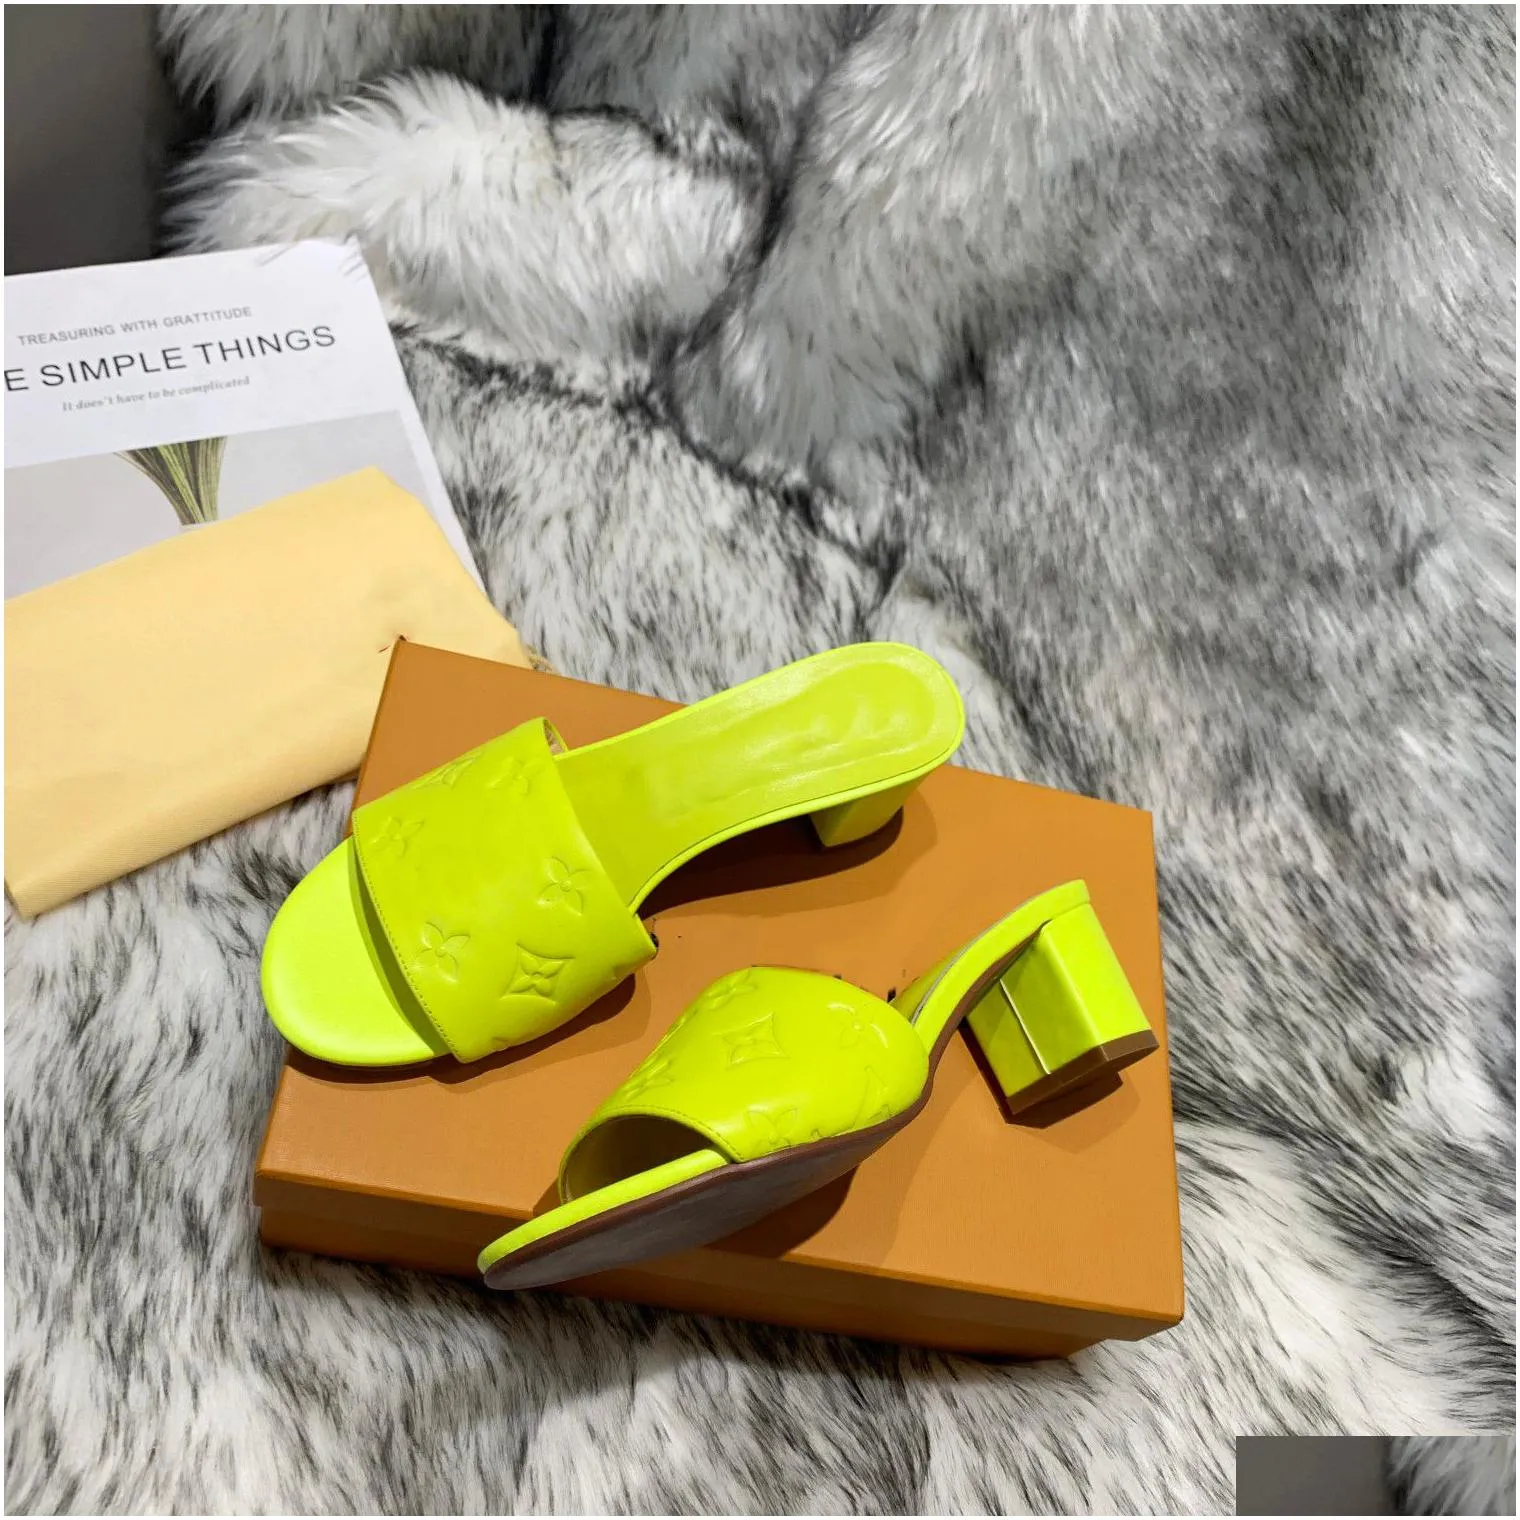 revival flat mule slippers women sandals fashion beach shoes leather slingback slipper size 3544